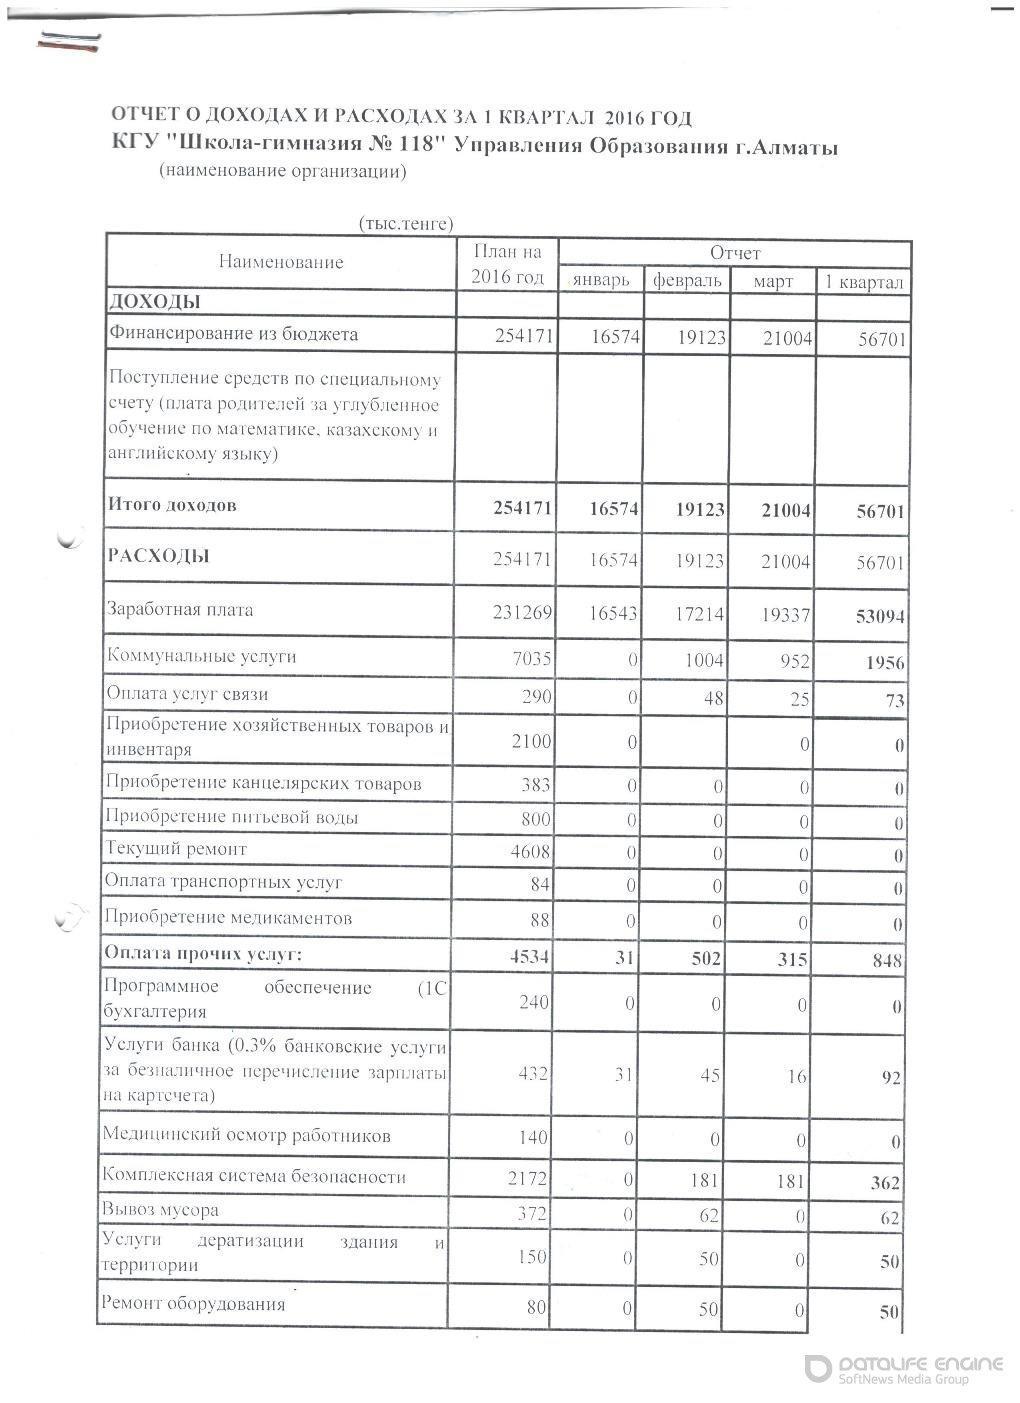 Statement of income and expenses за I квартал 2016 года